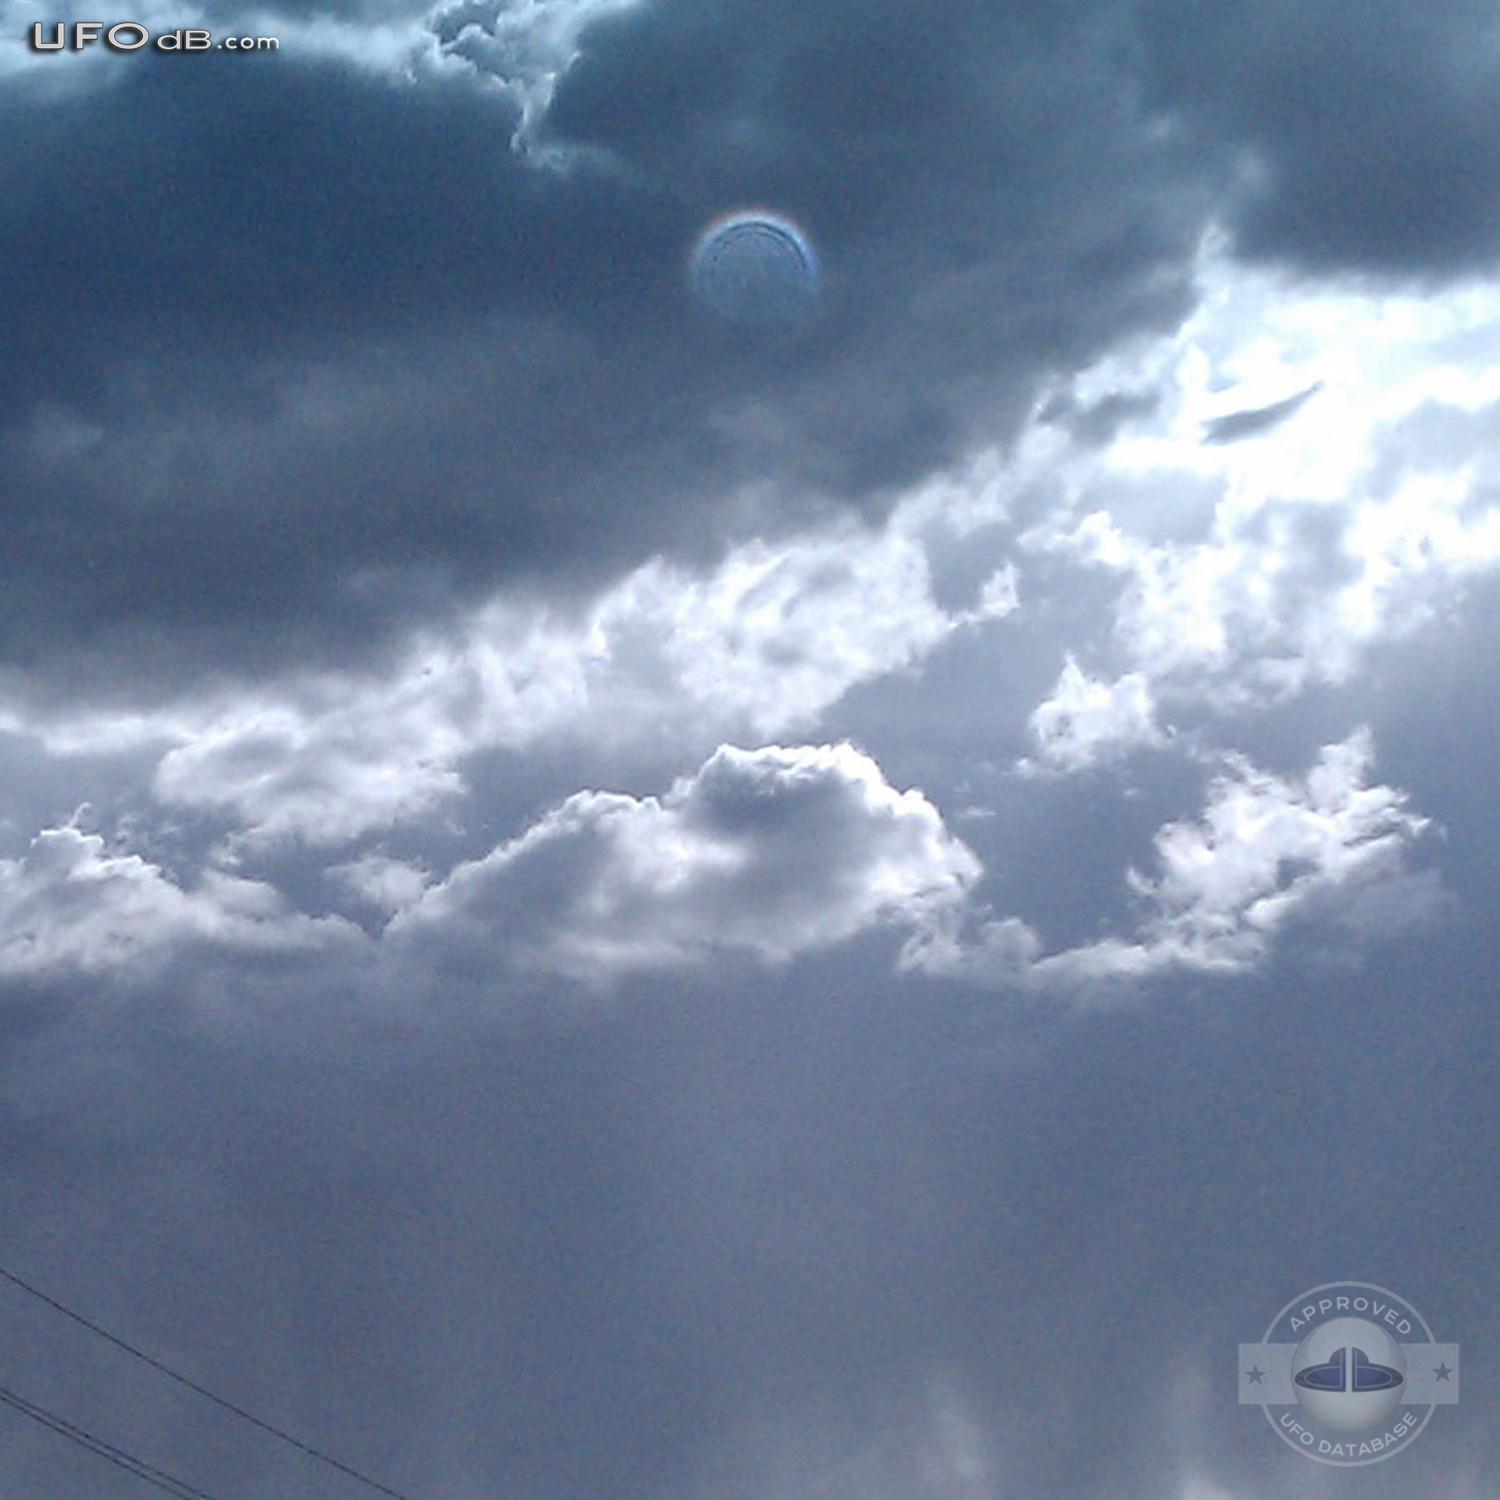 Large UFO coming through a Cloud in Las Vegas Nevada USA | May 13 2011 UFO Picture #334-3